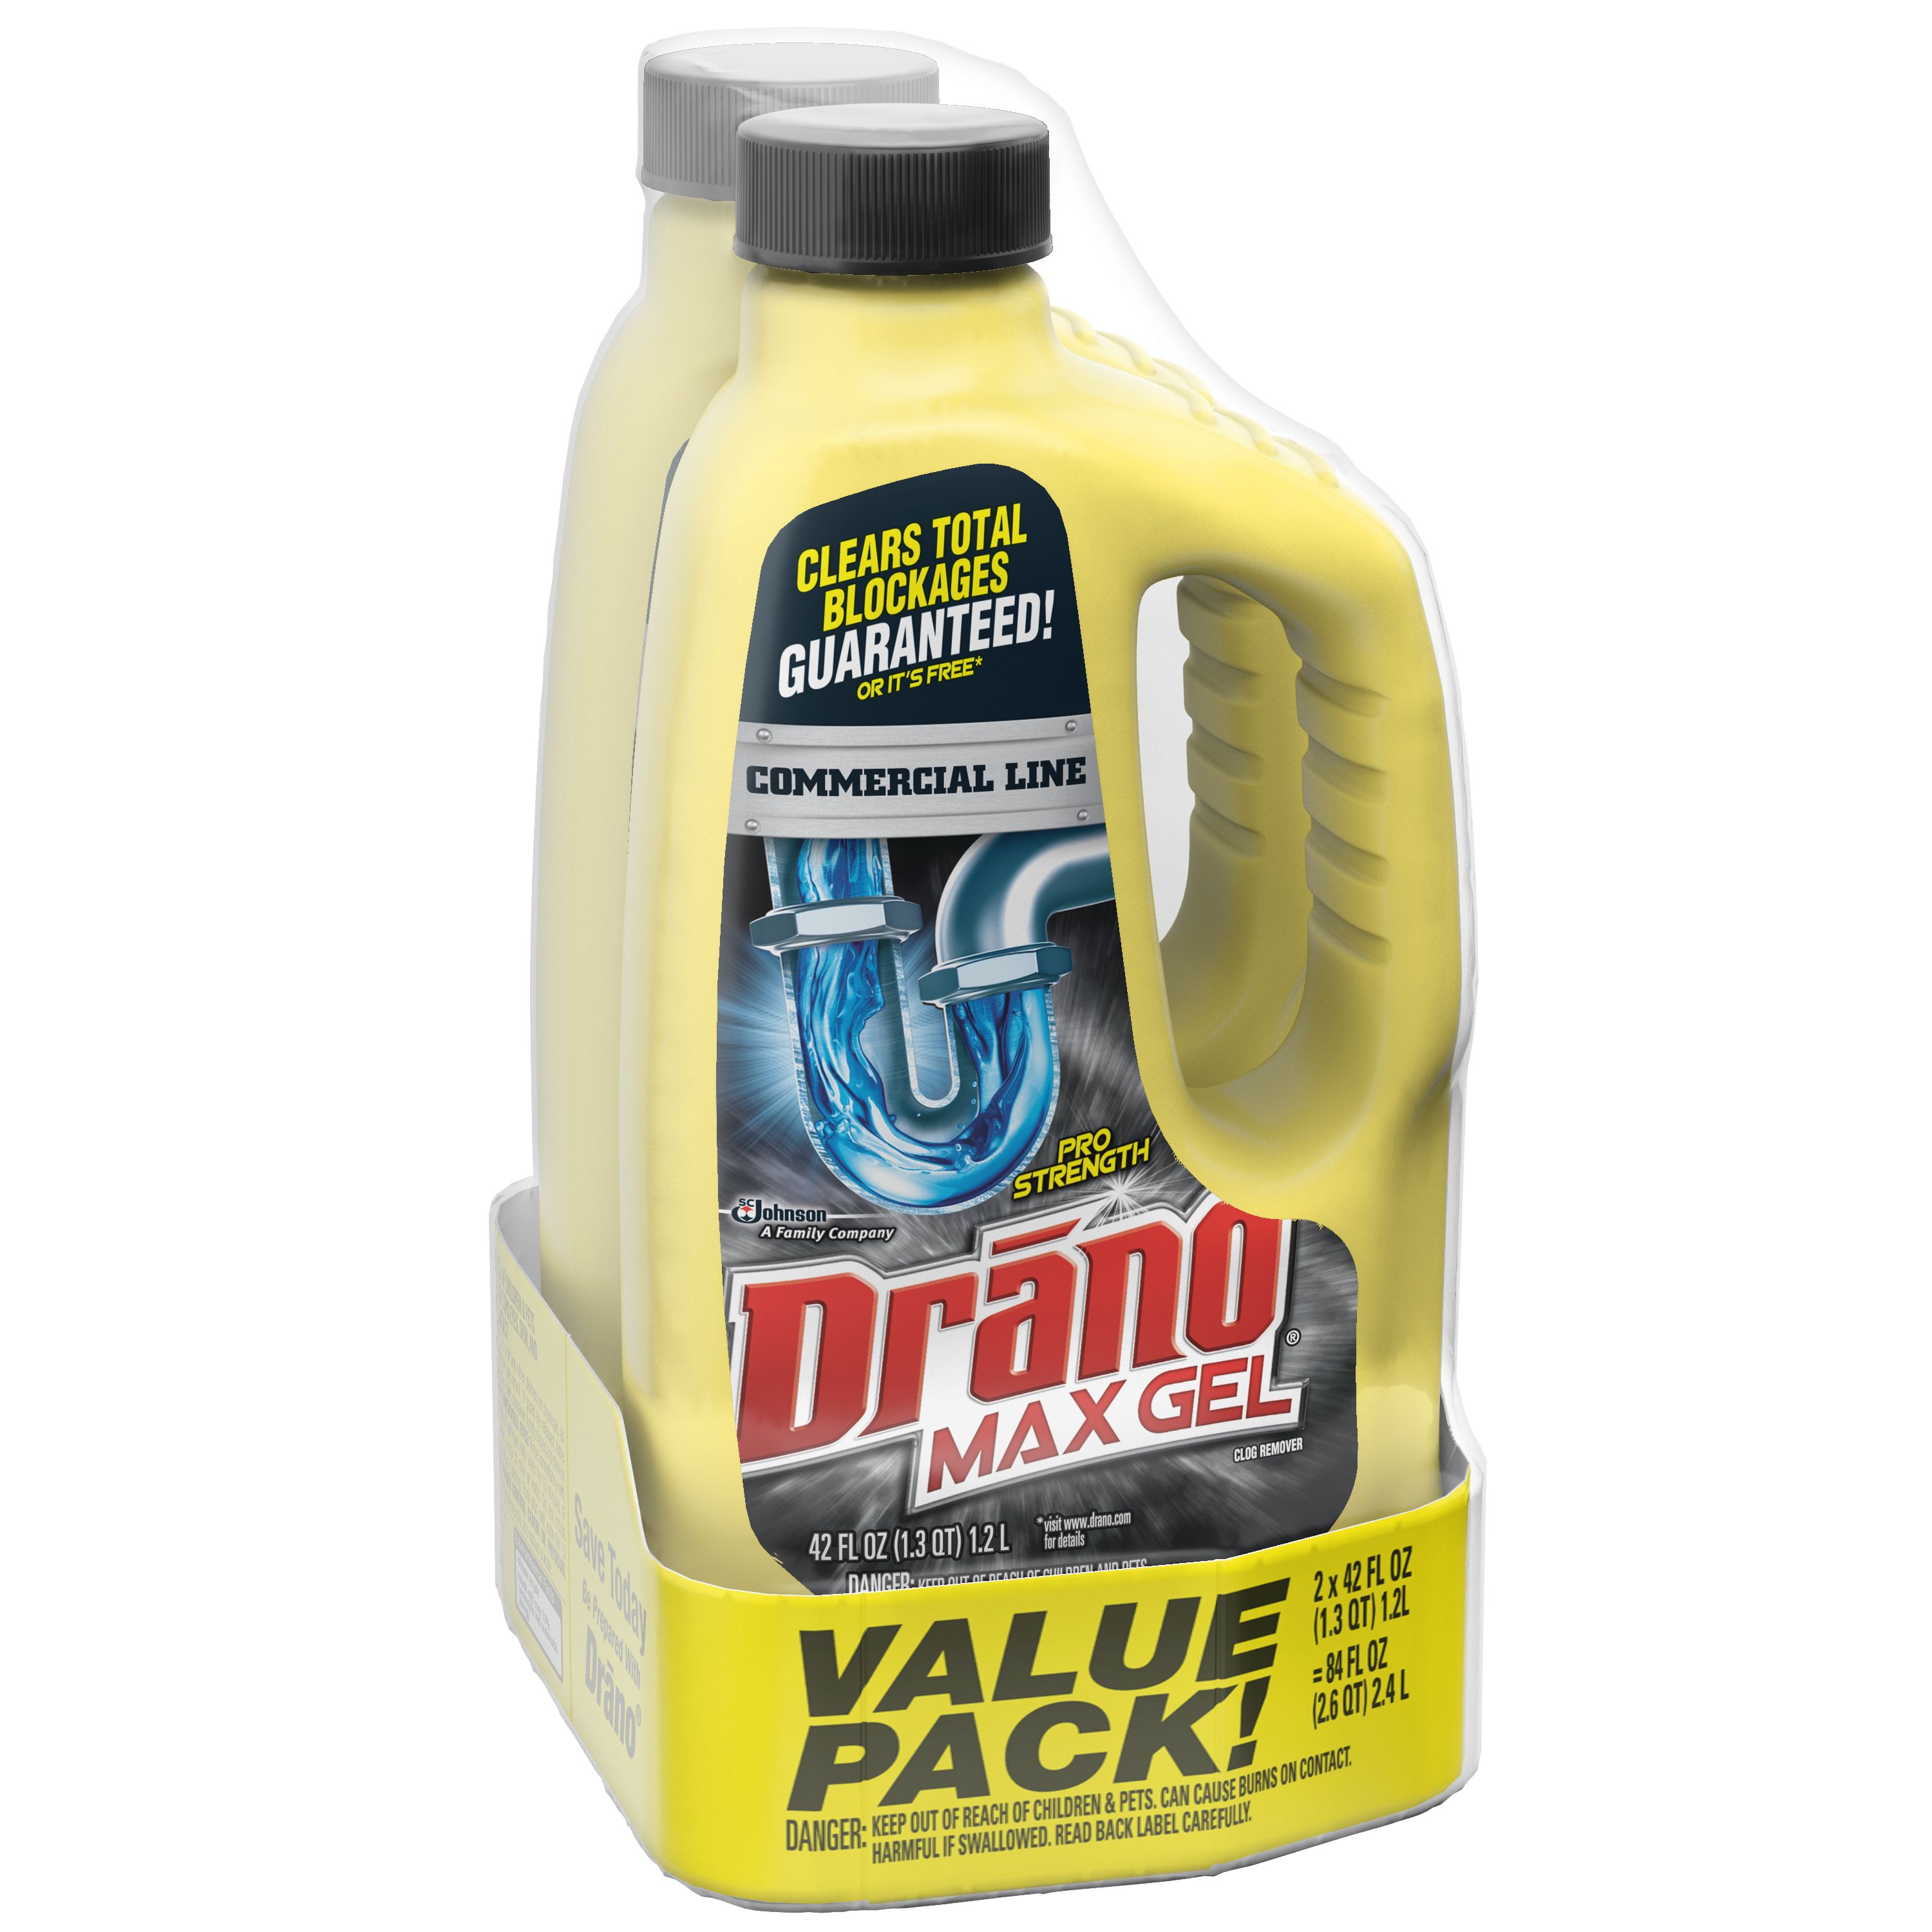 Why is it bad to use Drano on a clogged shower? - Quora